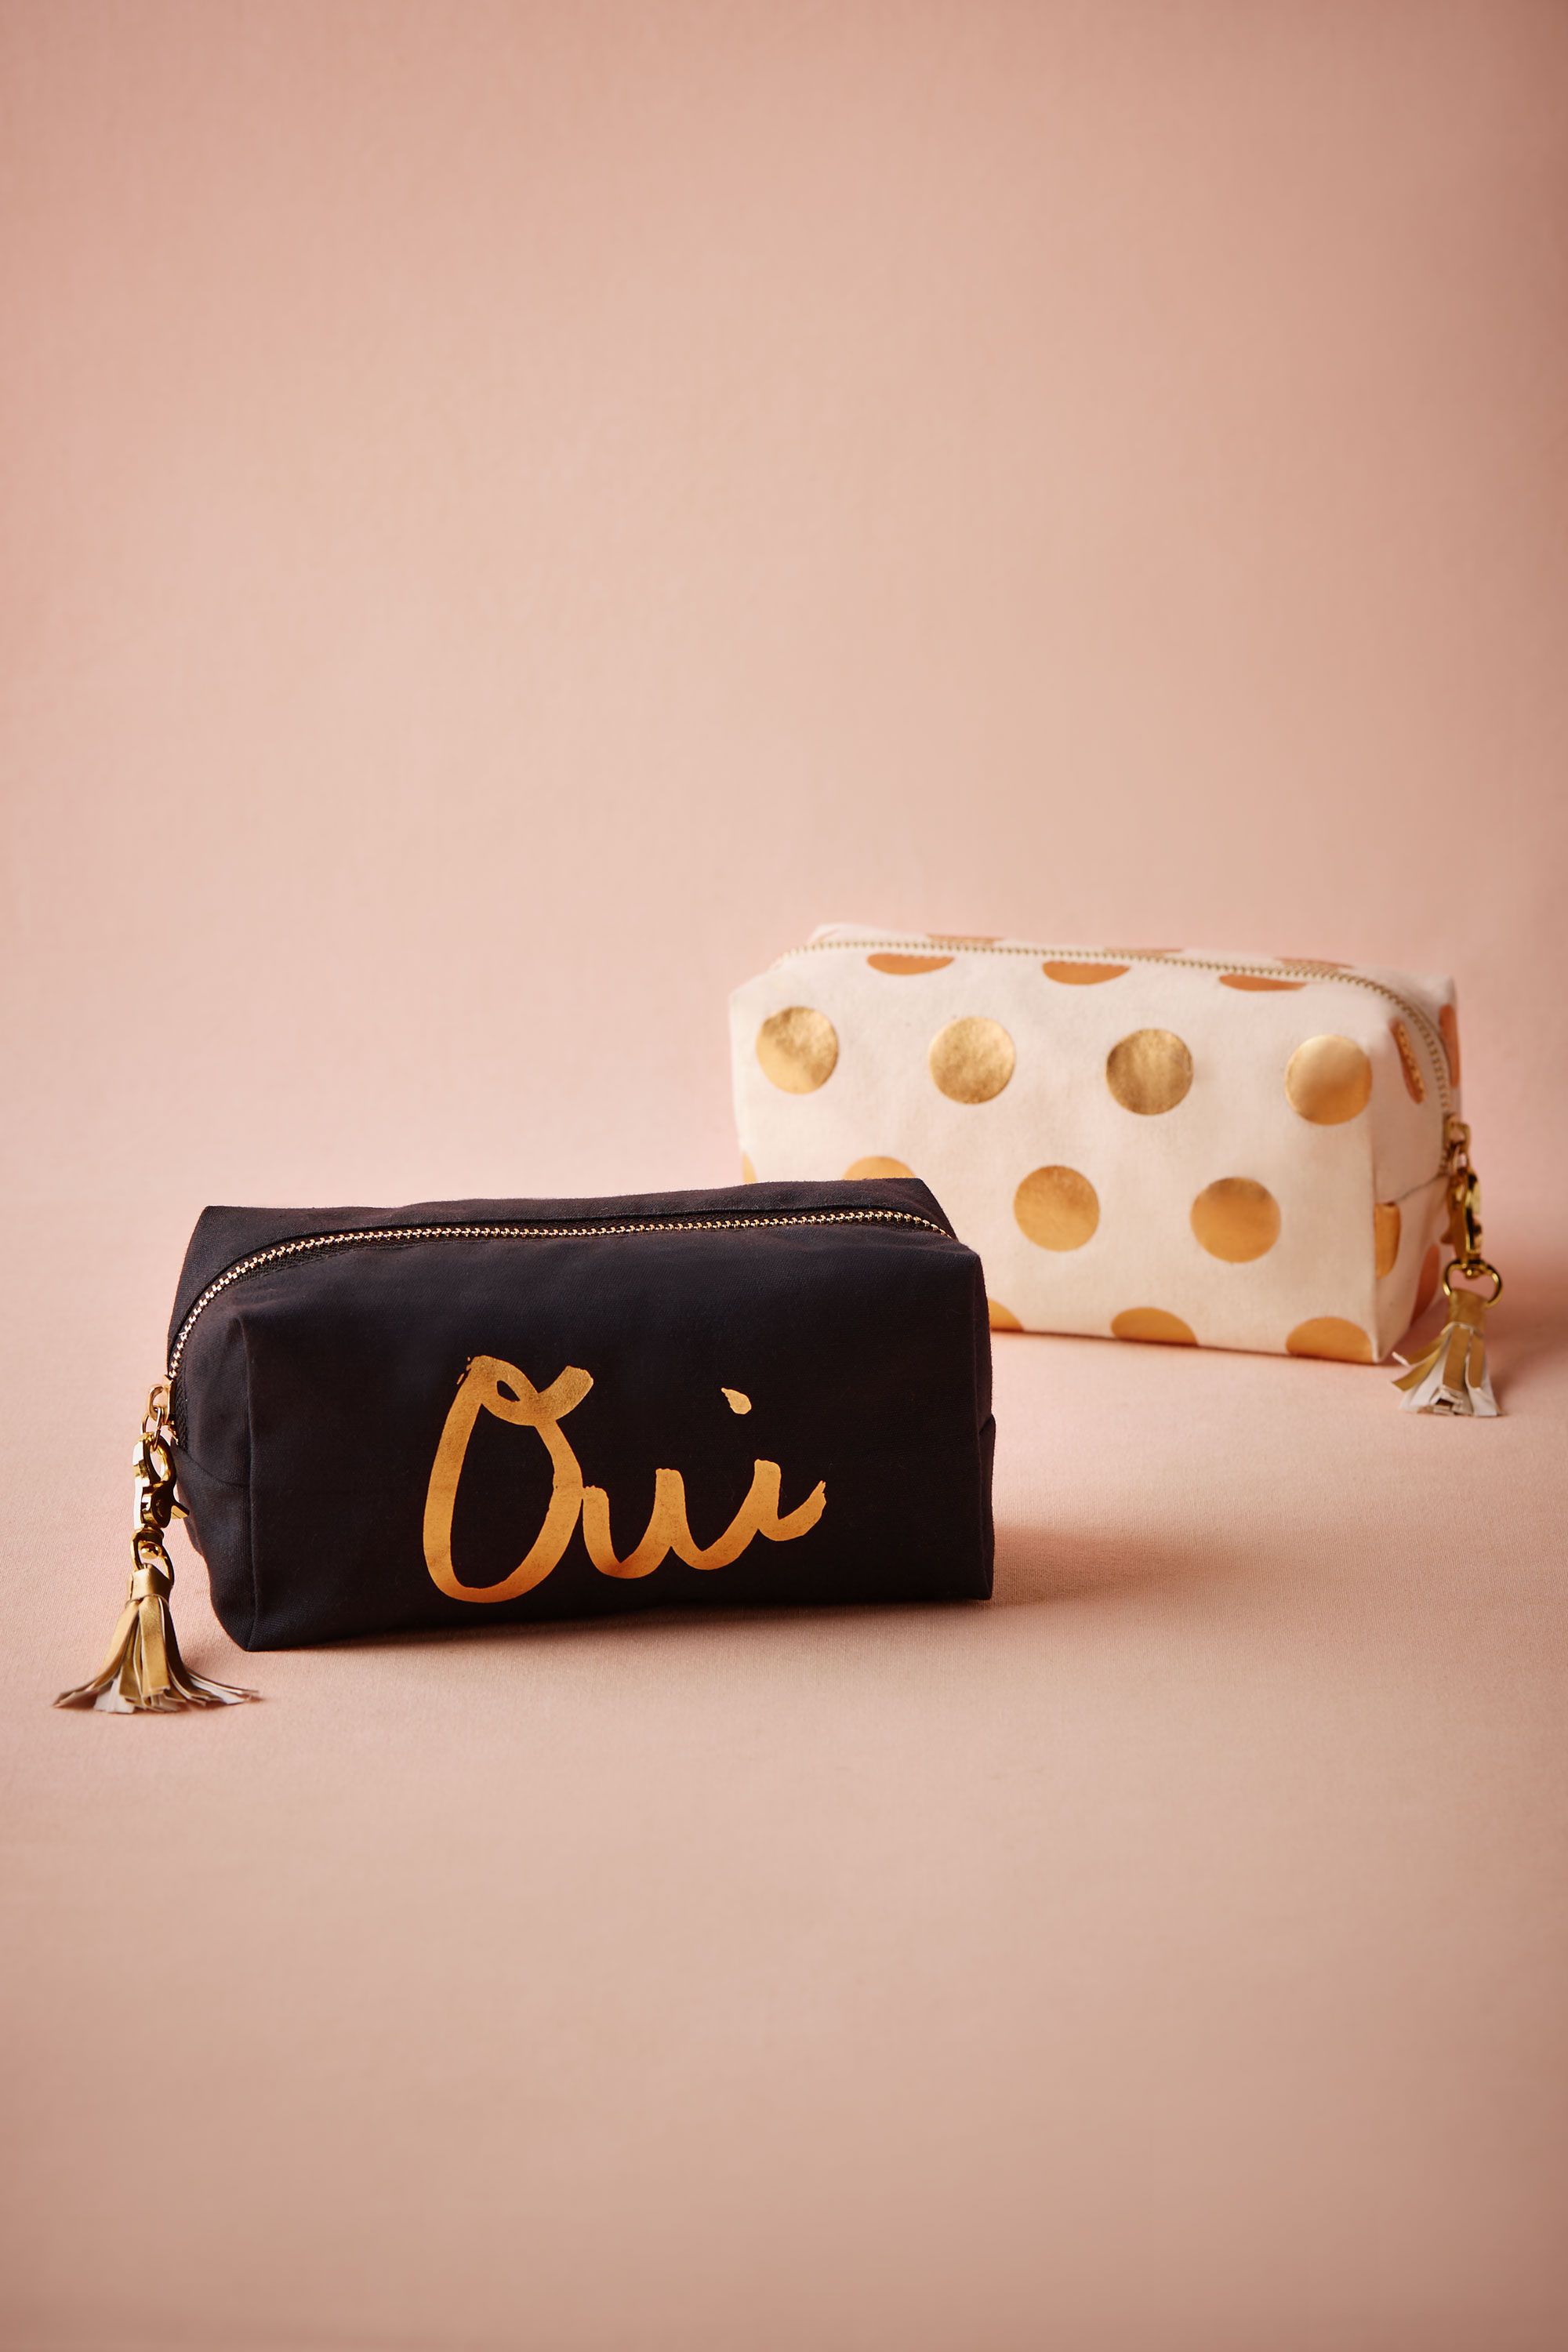 Gift Guide for the bride-to-be - Fill a cute cosmetic bag with her favourites